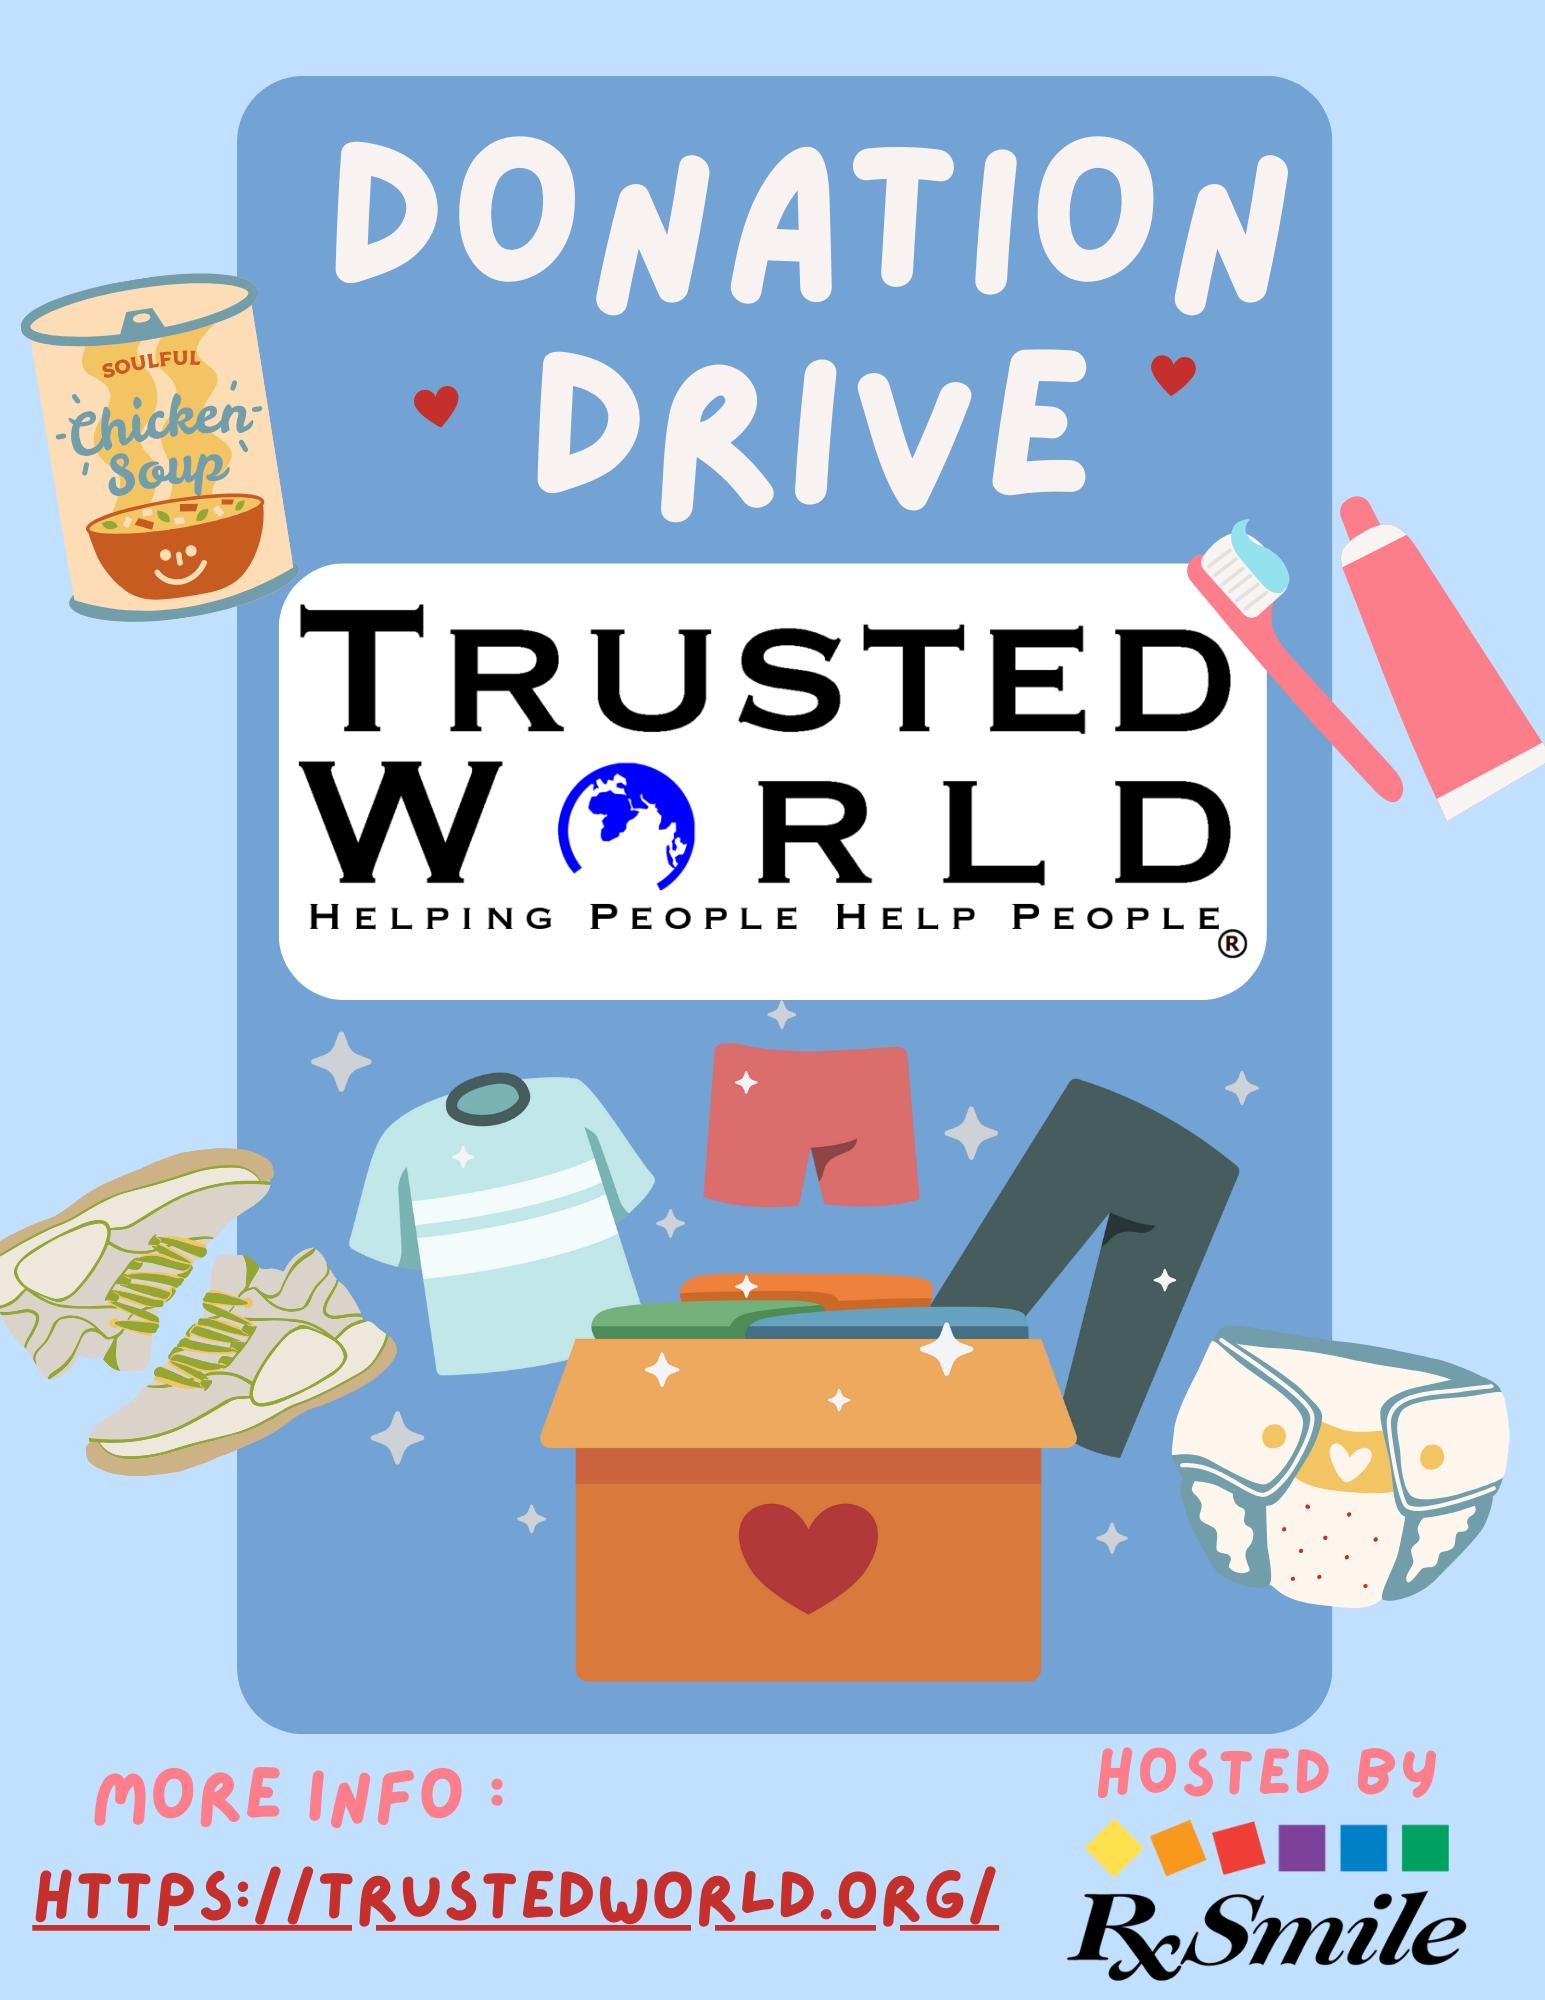 RxSmile donation drive benefiting Trusted World